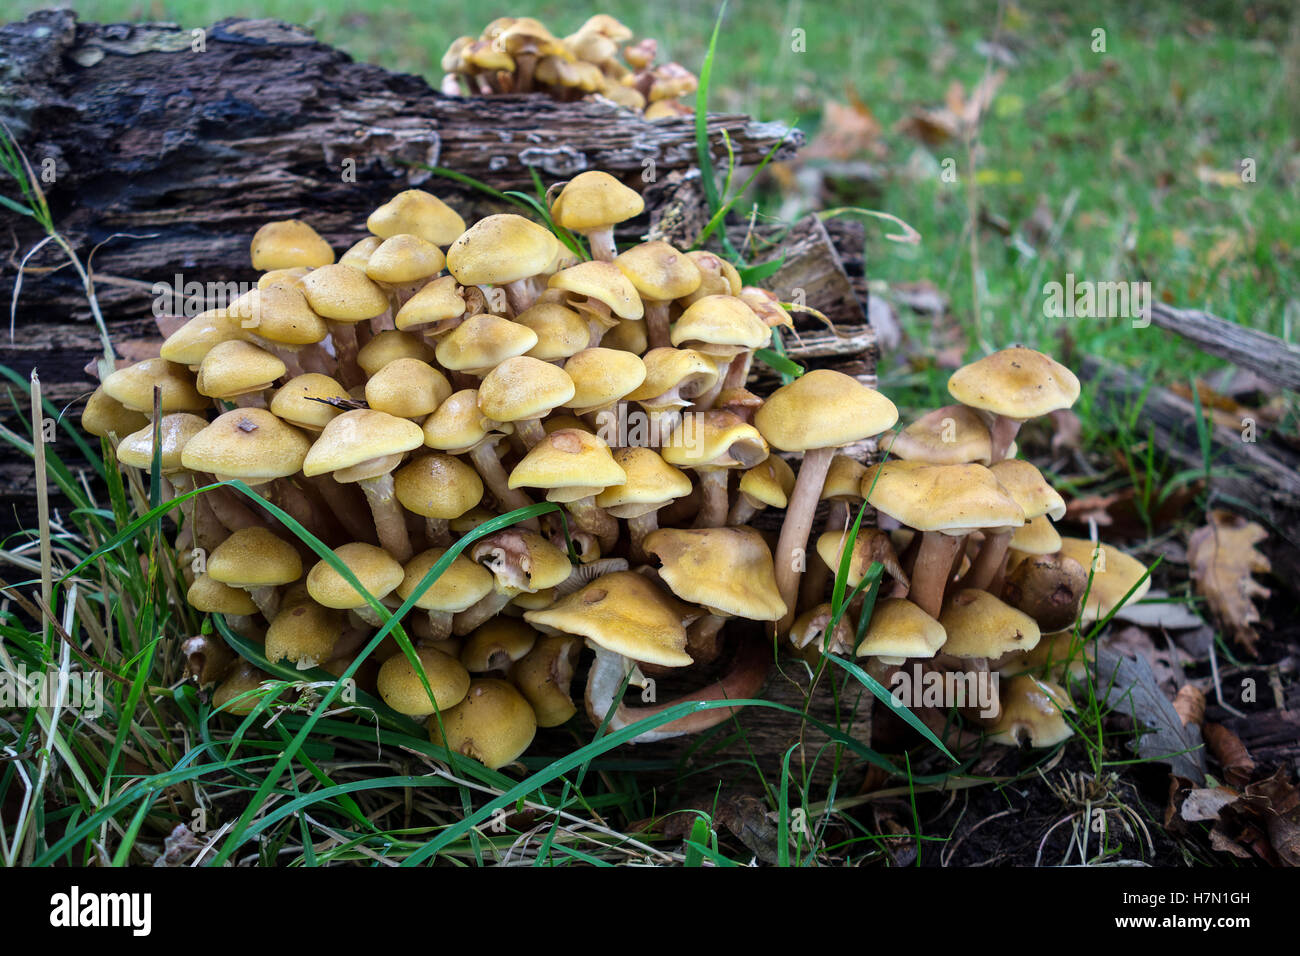 Sulpher Tufts Hypholema Fasciculare fungi growing on a rotting fallen tree. Stock Photo